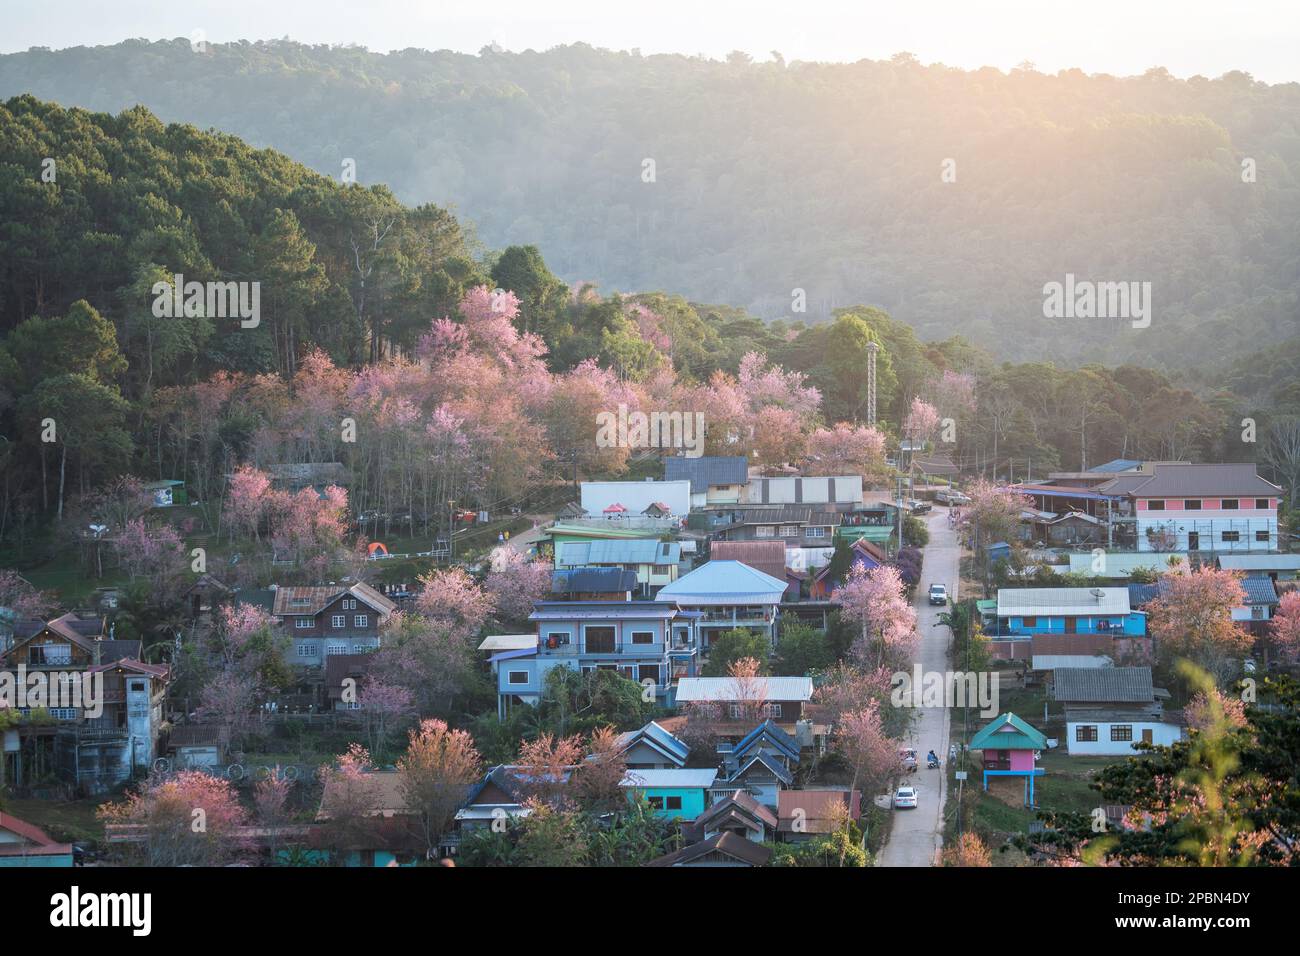 Aerial view Ban Rong Kla village with Wild Himalayan Cherry Blossom in Phitsanulok , Thailand. Beautiful landscape in the winter season. Stock Photo